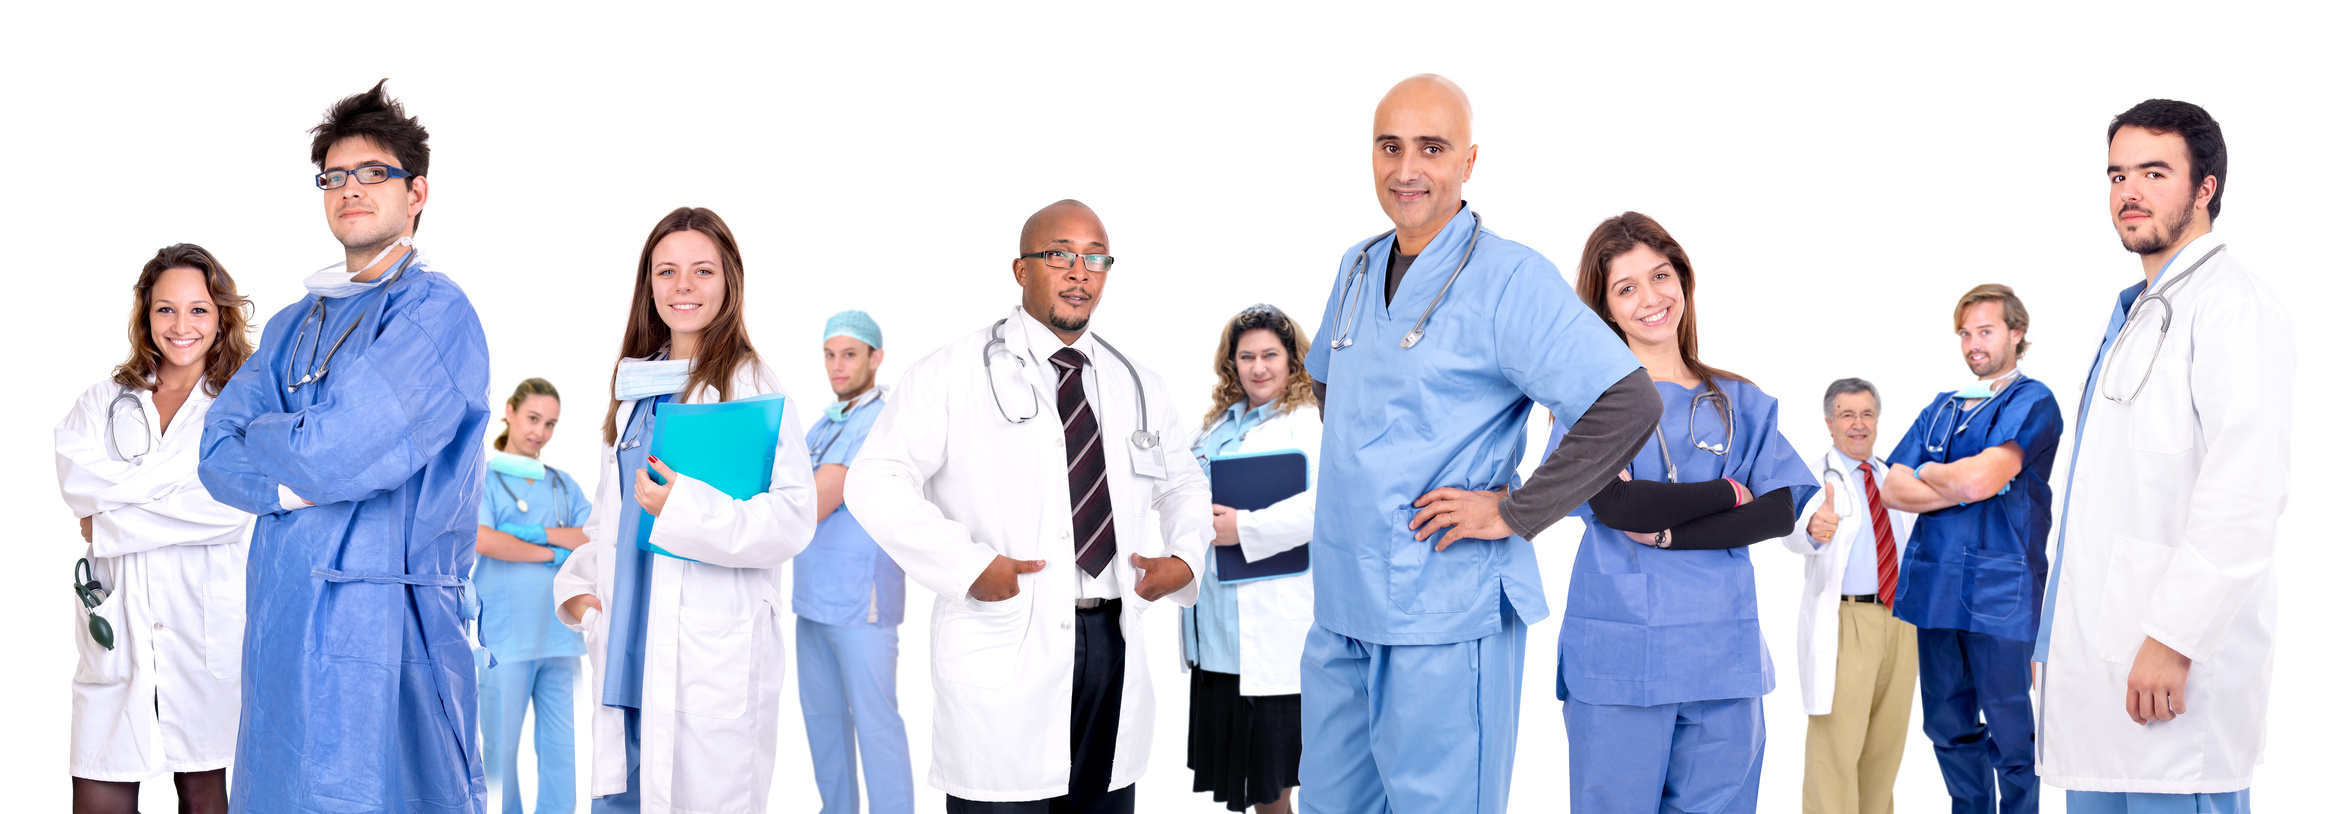 Healthcare jobs from medical employment